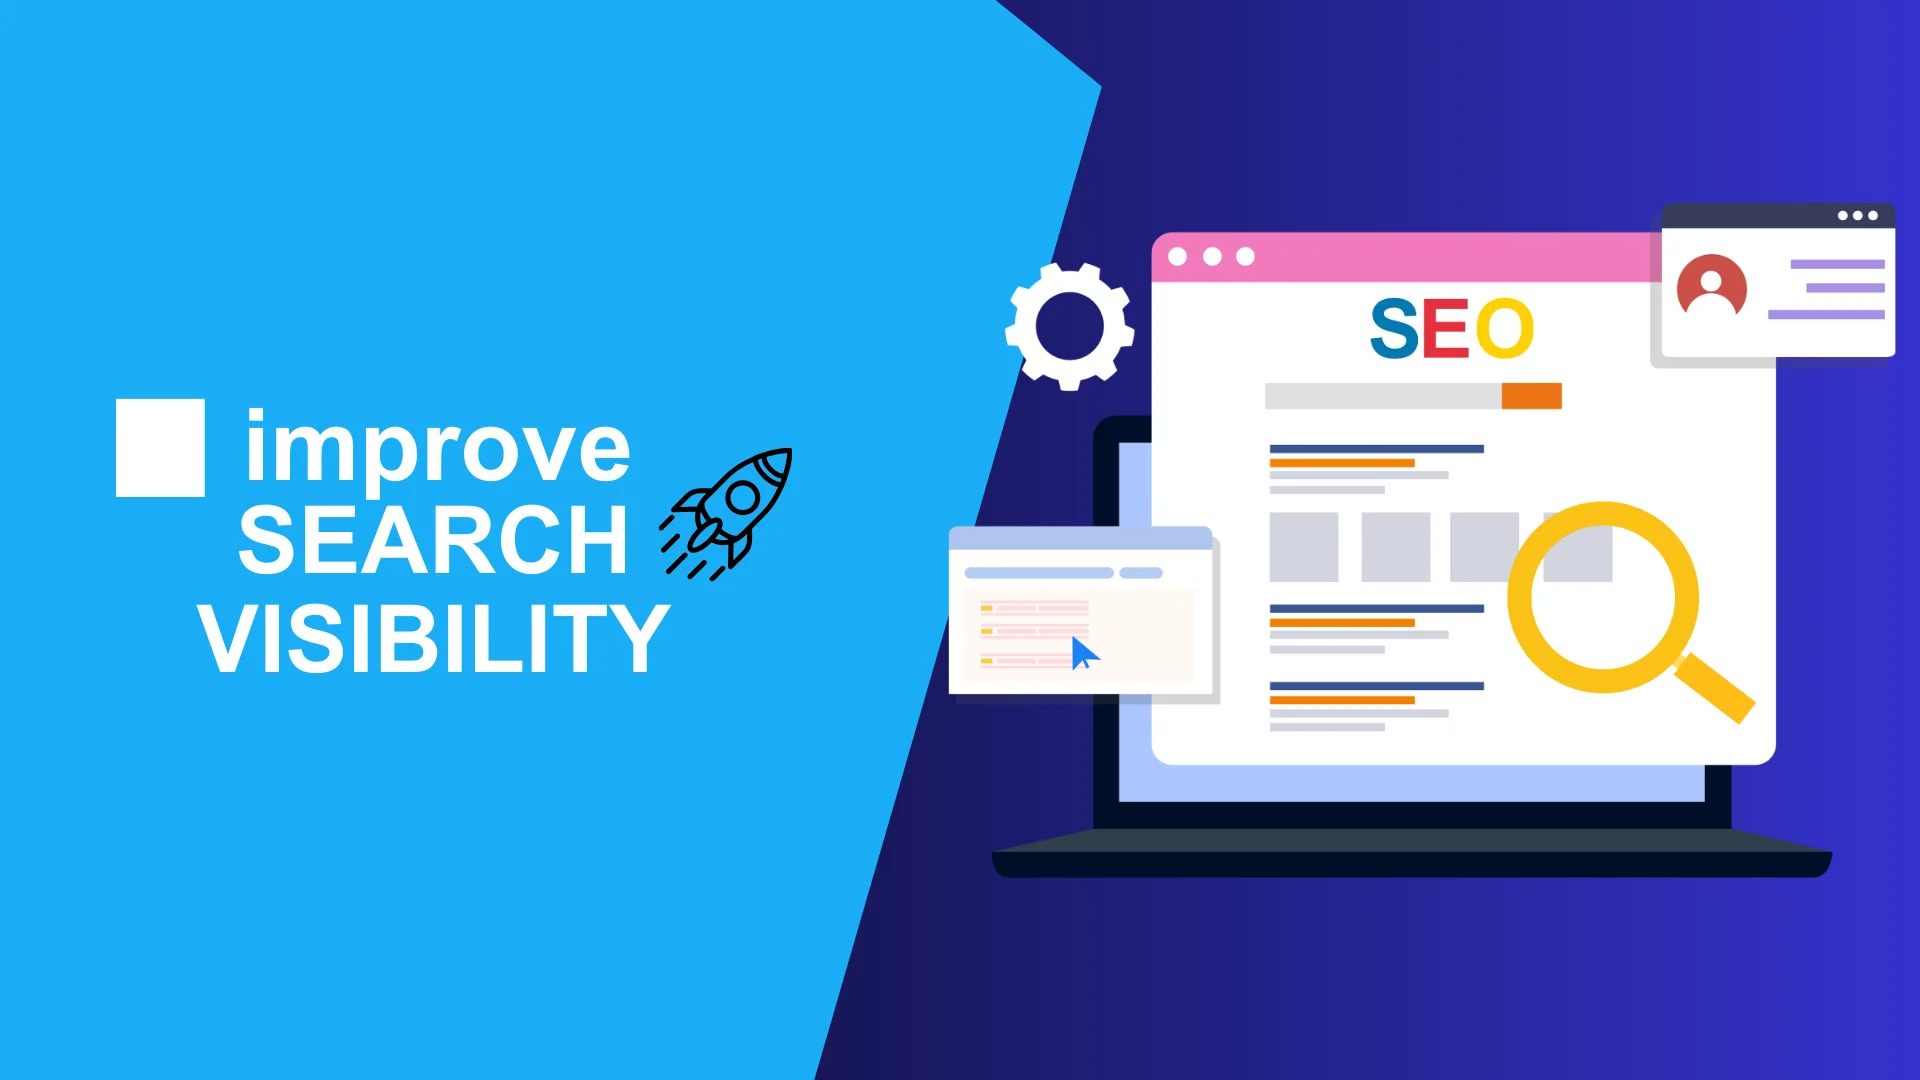 Improving Search Visibility: Controlling Snippets in Search Results